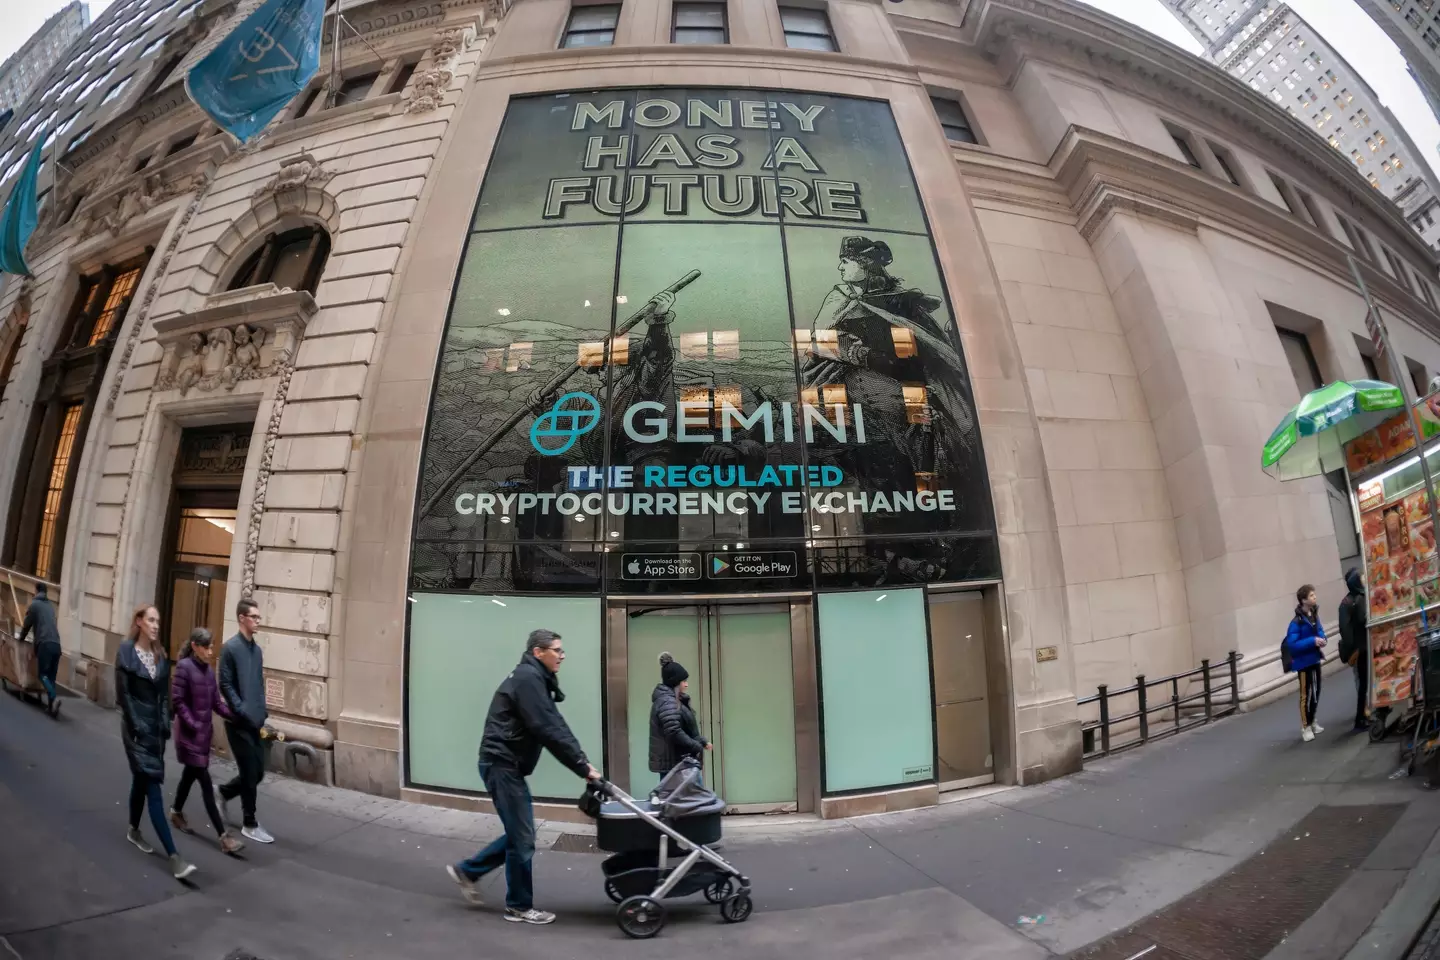 The lawsuit claims Gemini has caused 'financial losses' for investors.